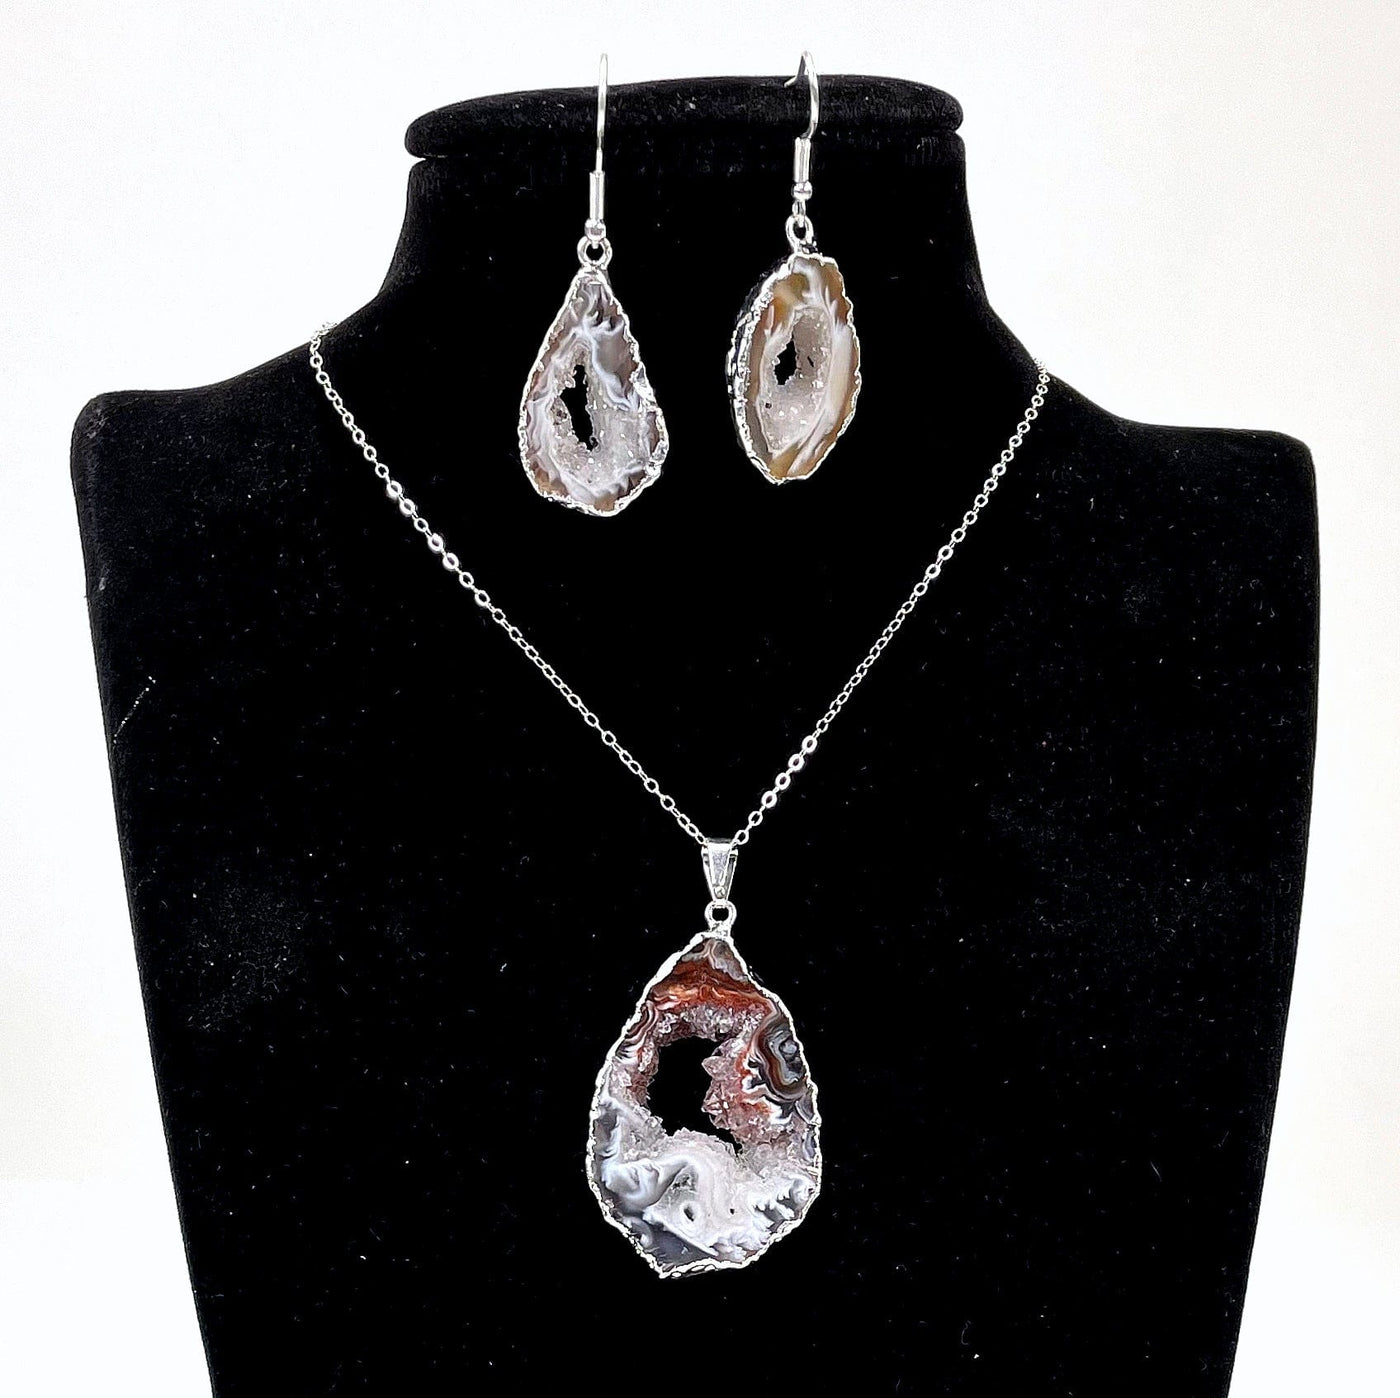 close up of one agate druzy slice pendant and earring set on bust display